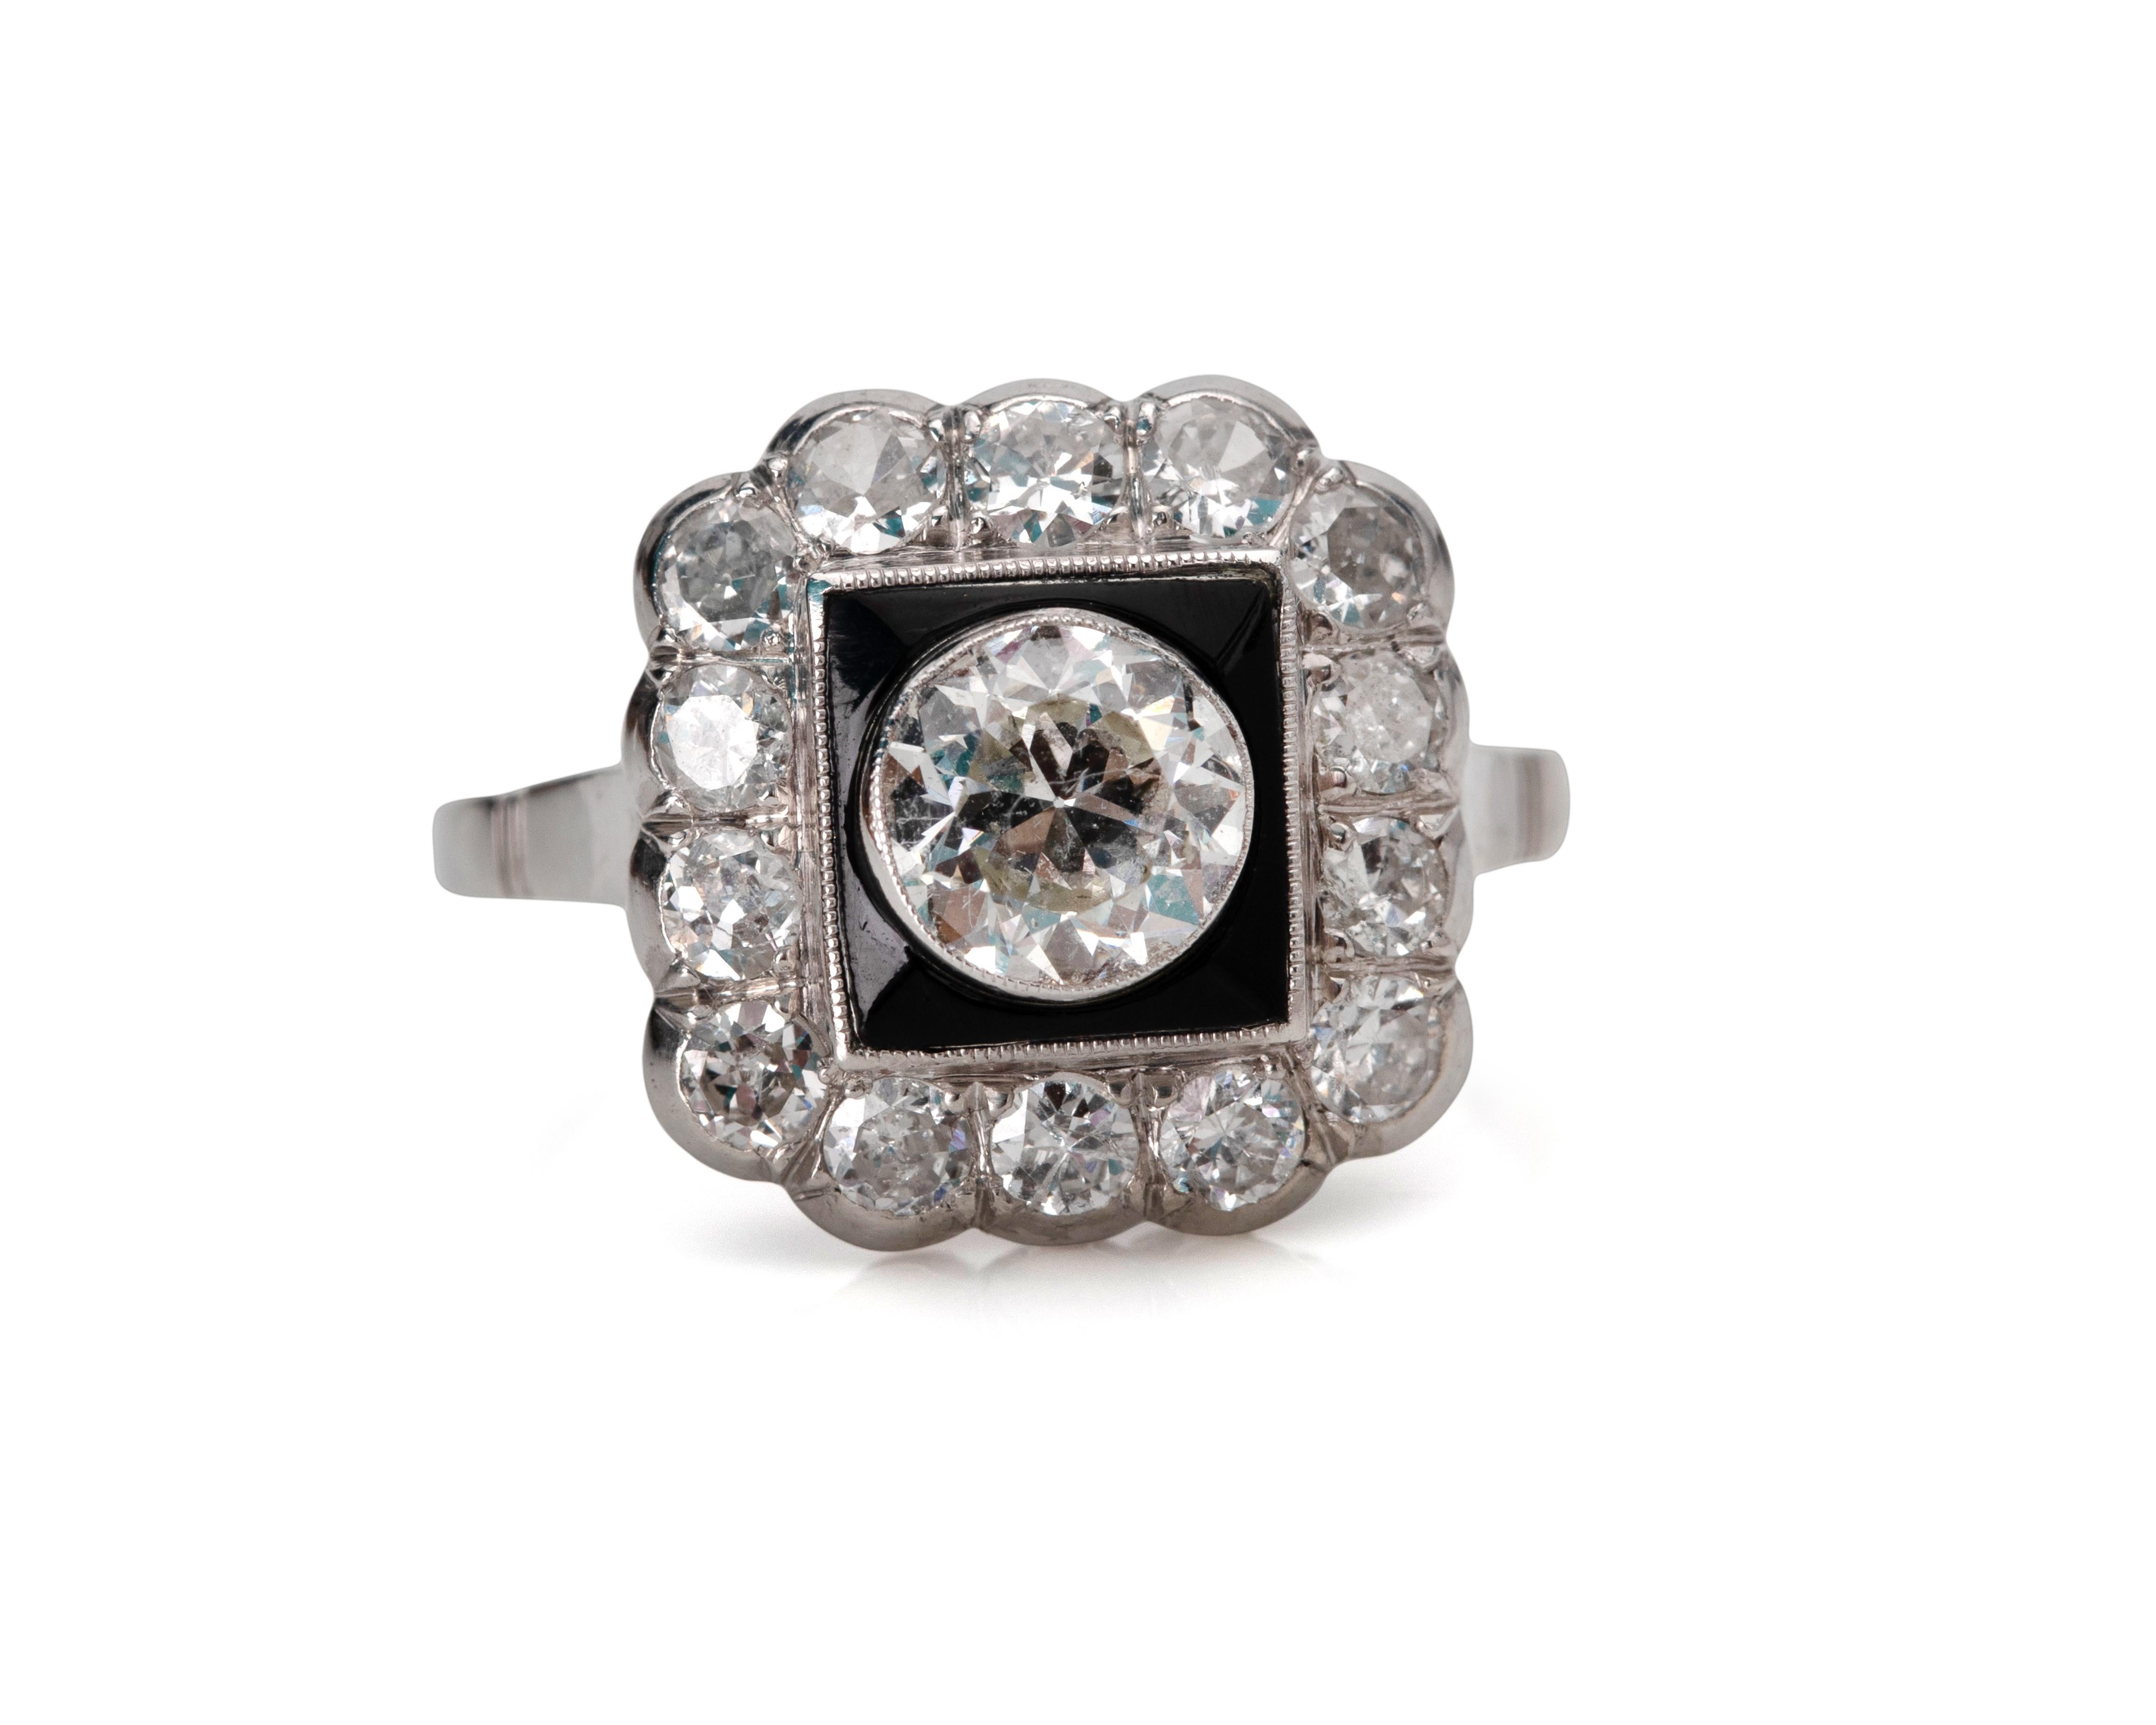 Here we have a excellent example of a late Art Deco style ring! This genuine 1940's ring features a brilliant .81 Carat Old European cut diamond bezel set in a very cool halo style ring. The ring utilizes black onyx for a added level of contrast to